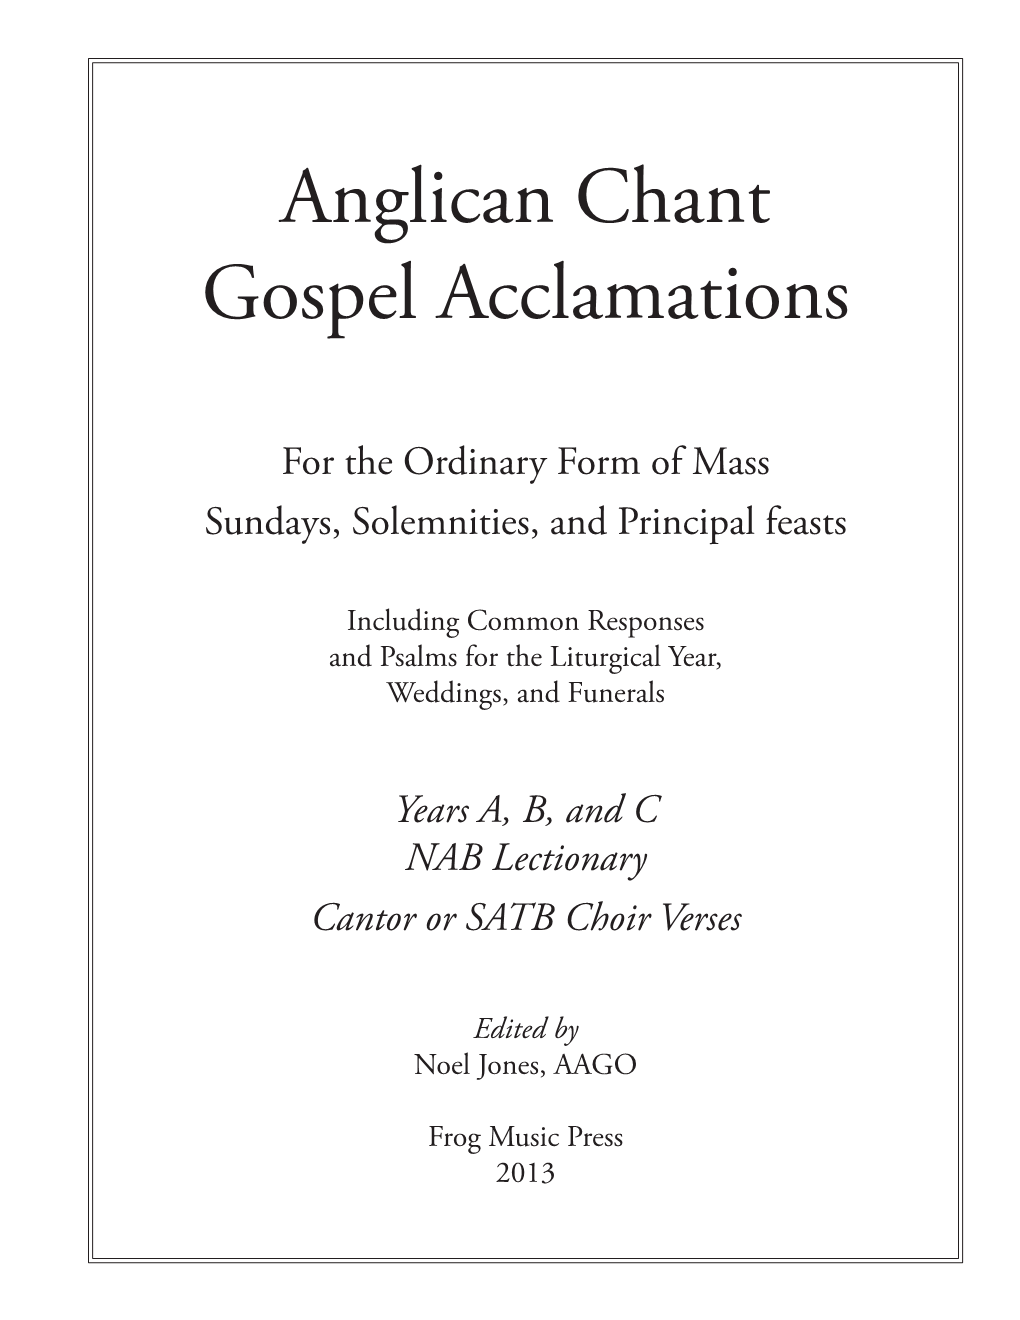 Anglican Chant Gospel Acclamations